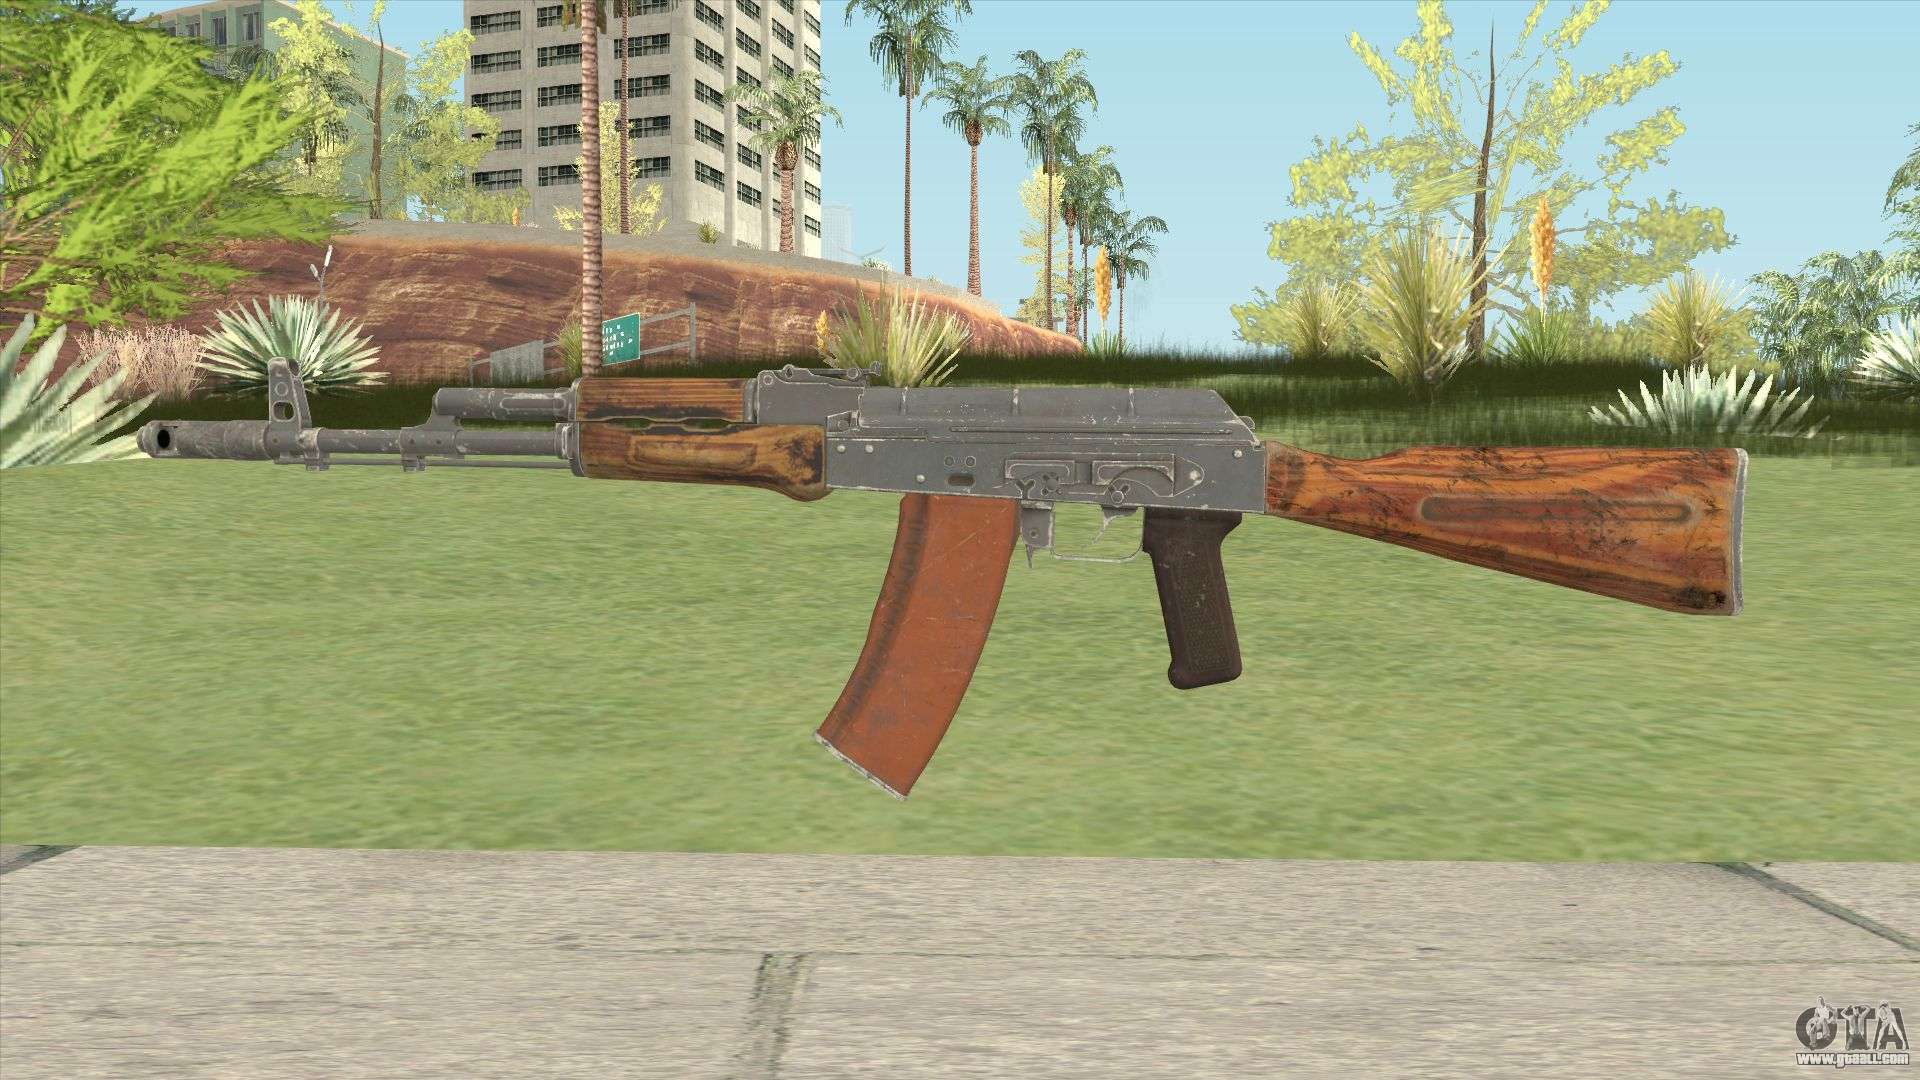 Download Contract Wars AK-74 for GTA San Andreas